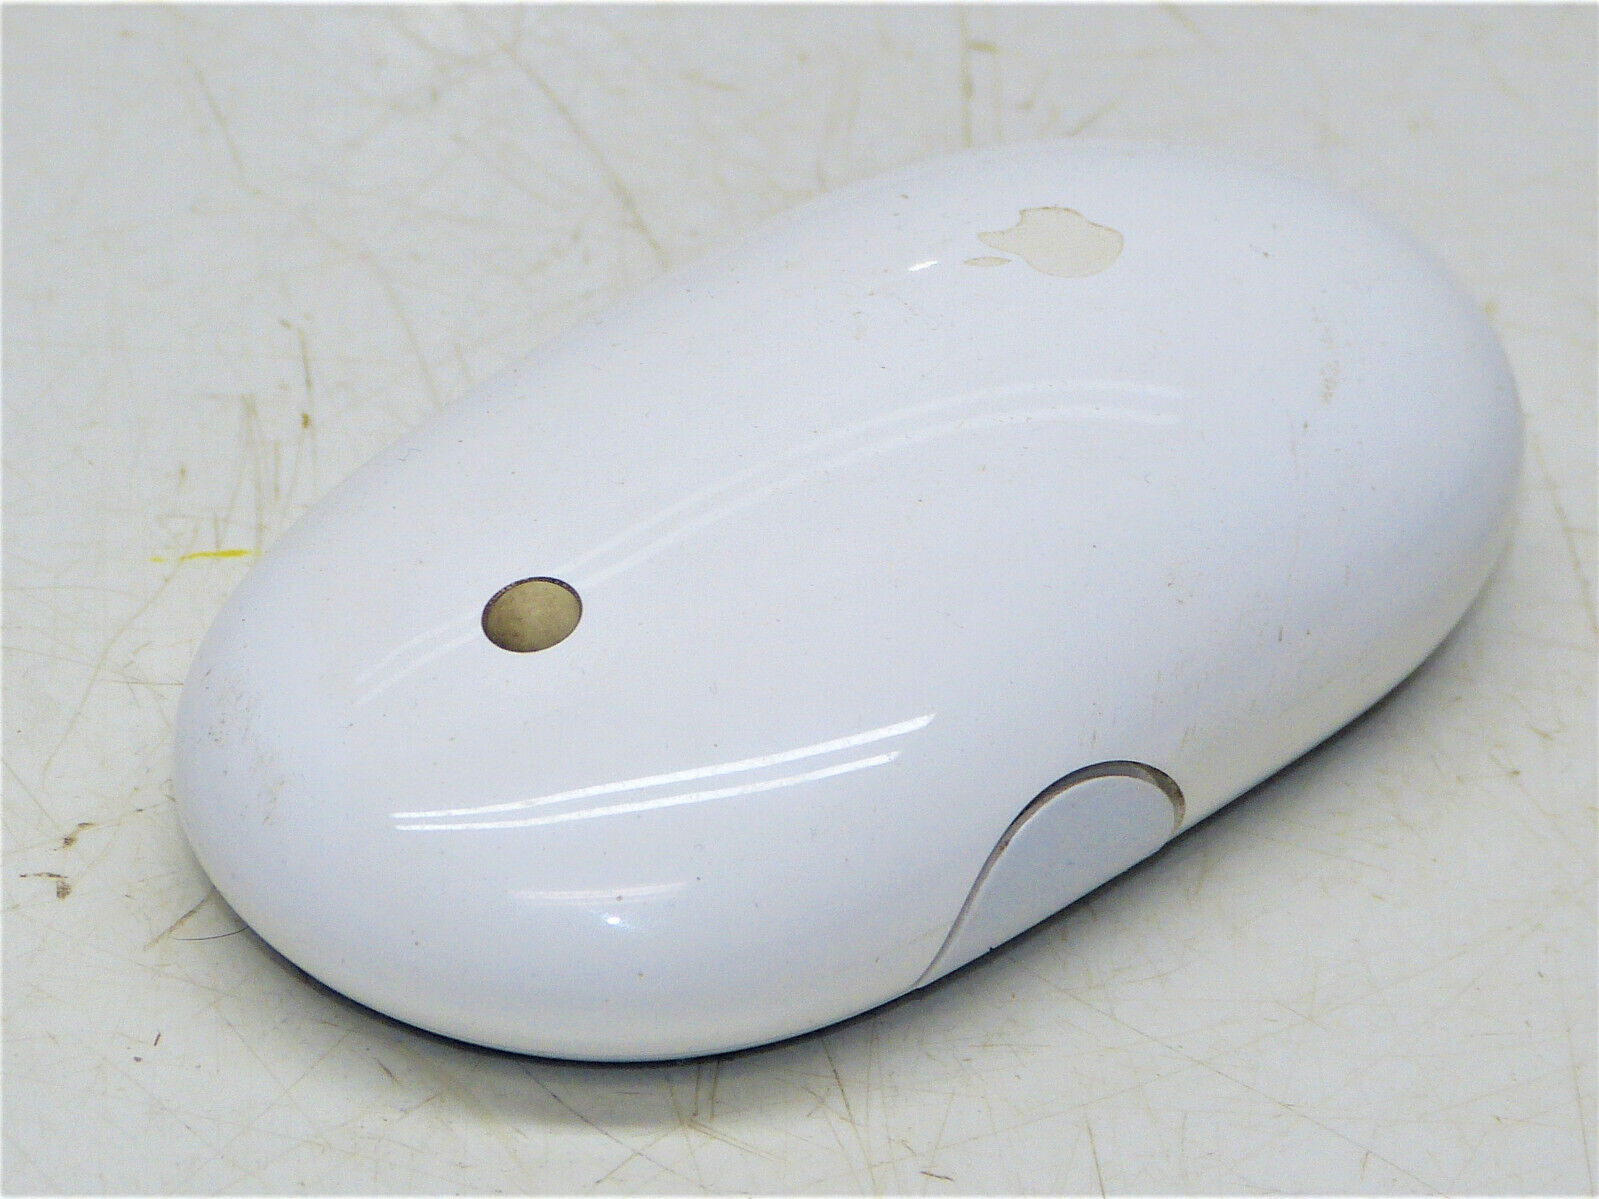 Apple A1197 Wireless Mighty Mouse Bluetooth Optical Mouse INV16003